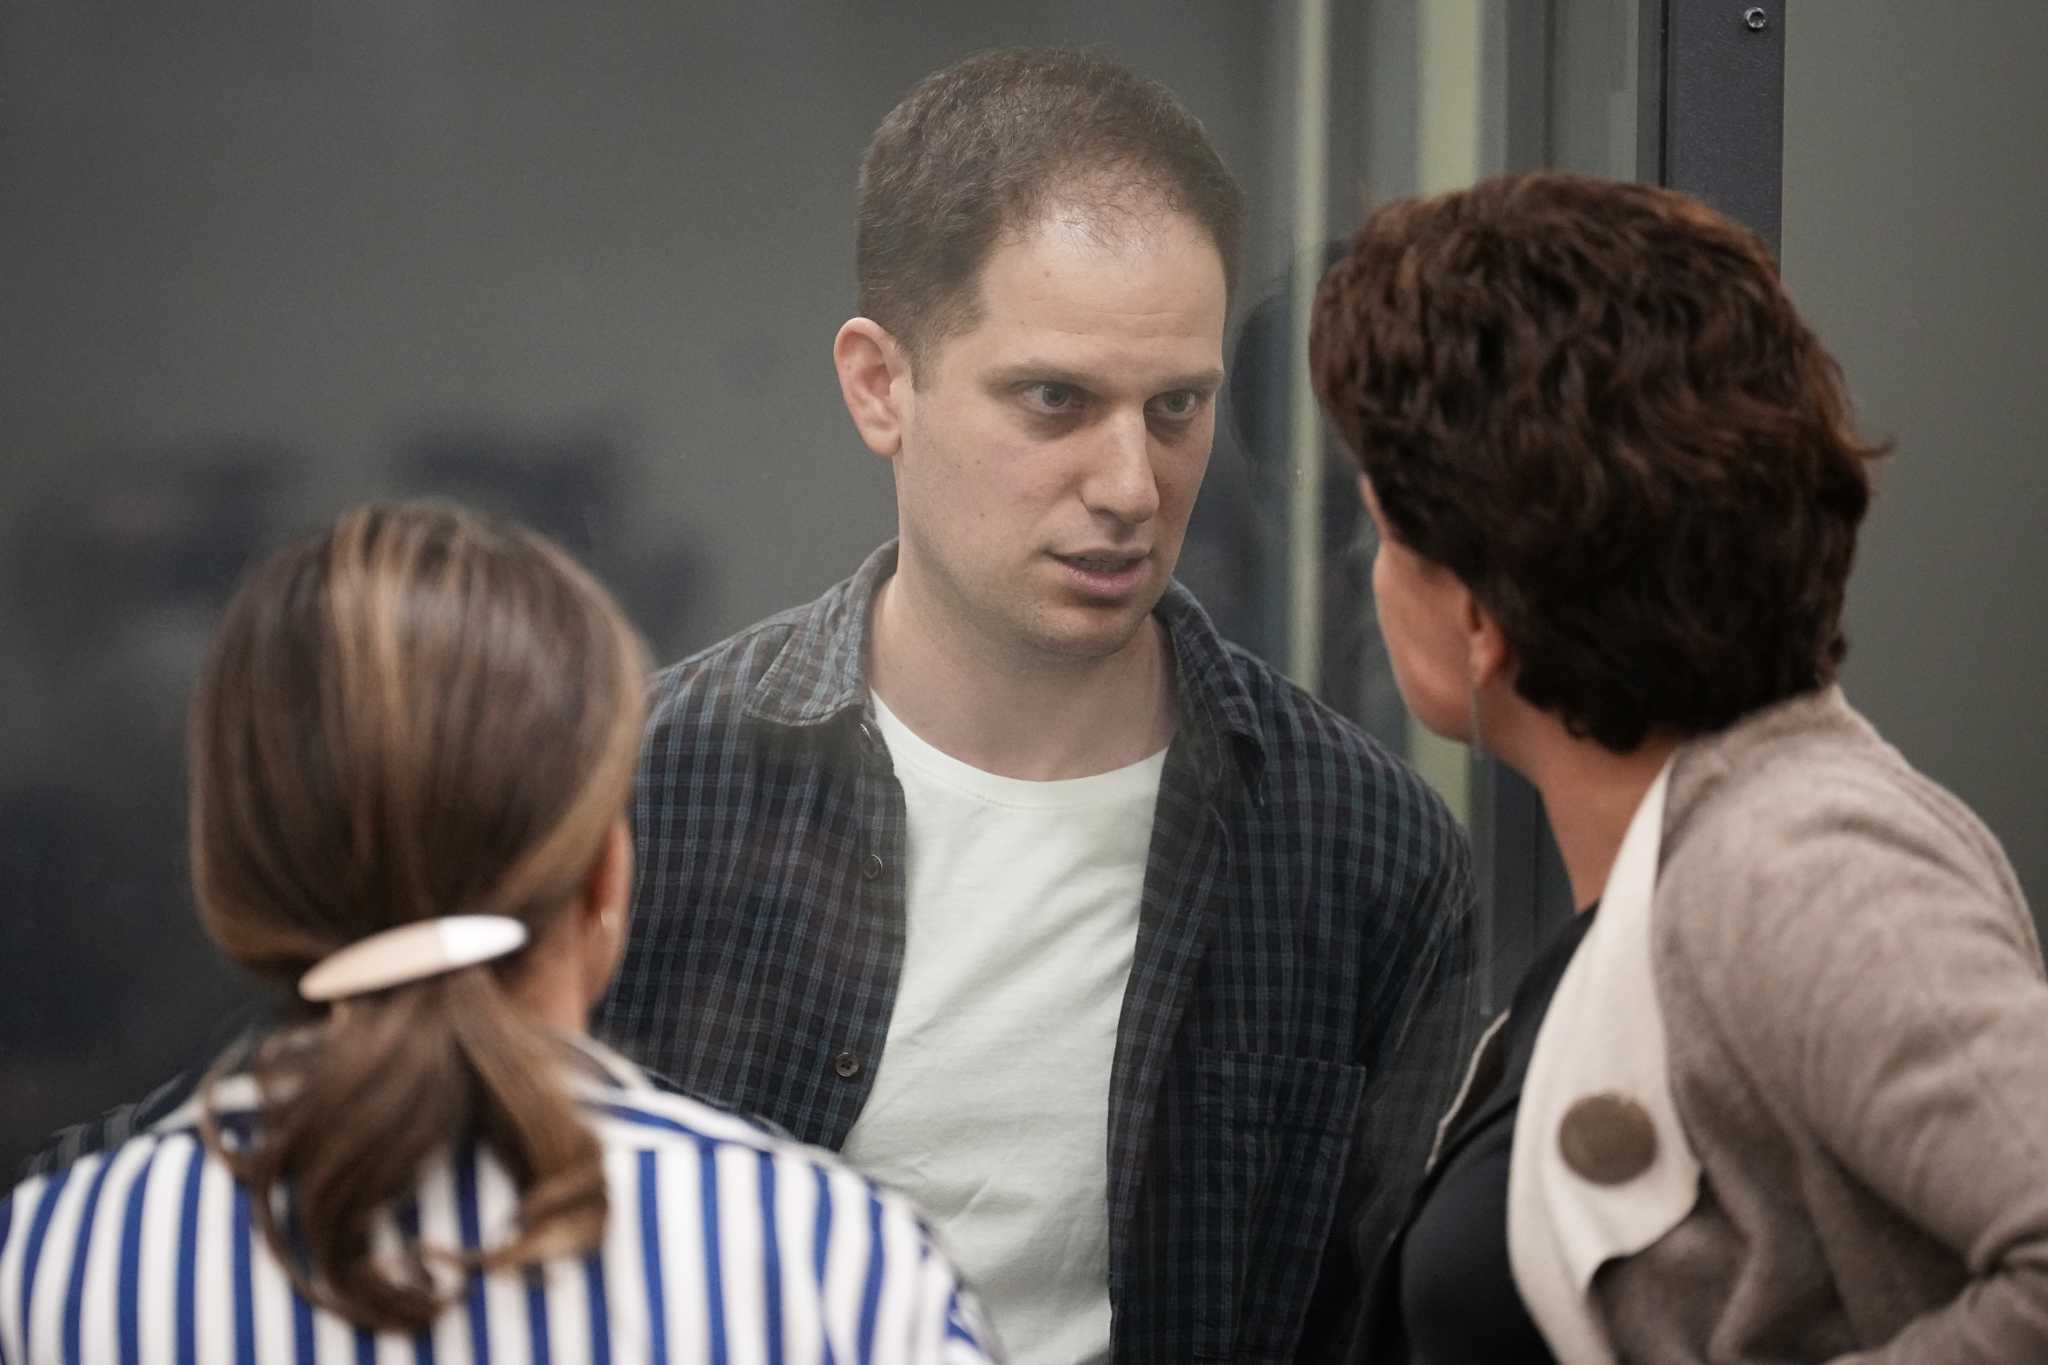 Moscow court rejects Evan Gershkovich's appeal, keeping him in jail until at least June 30